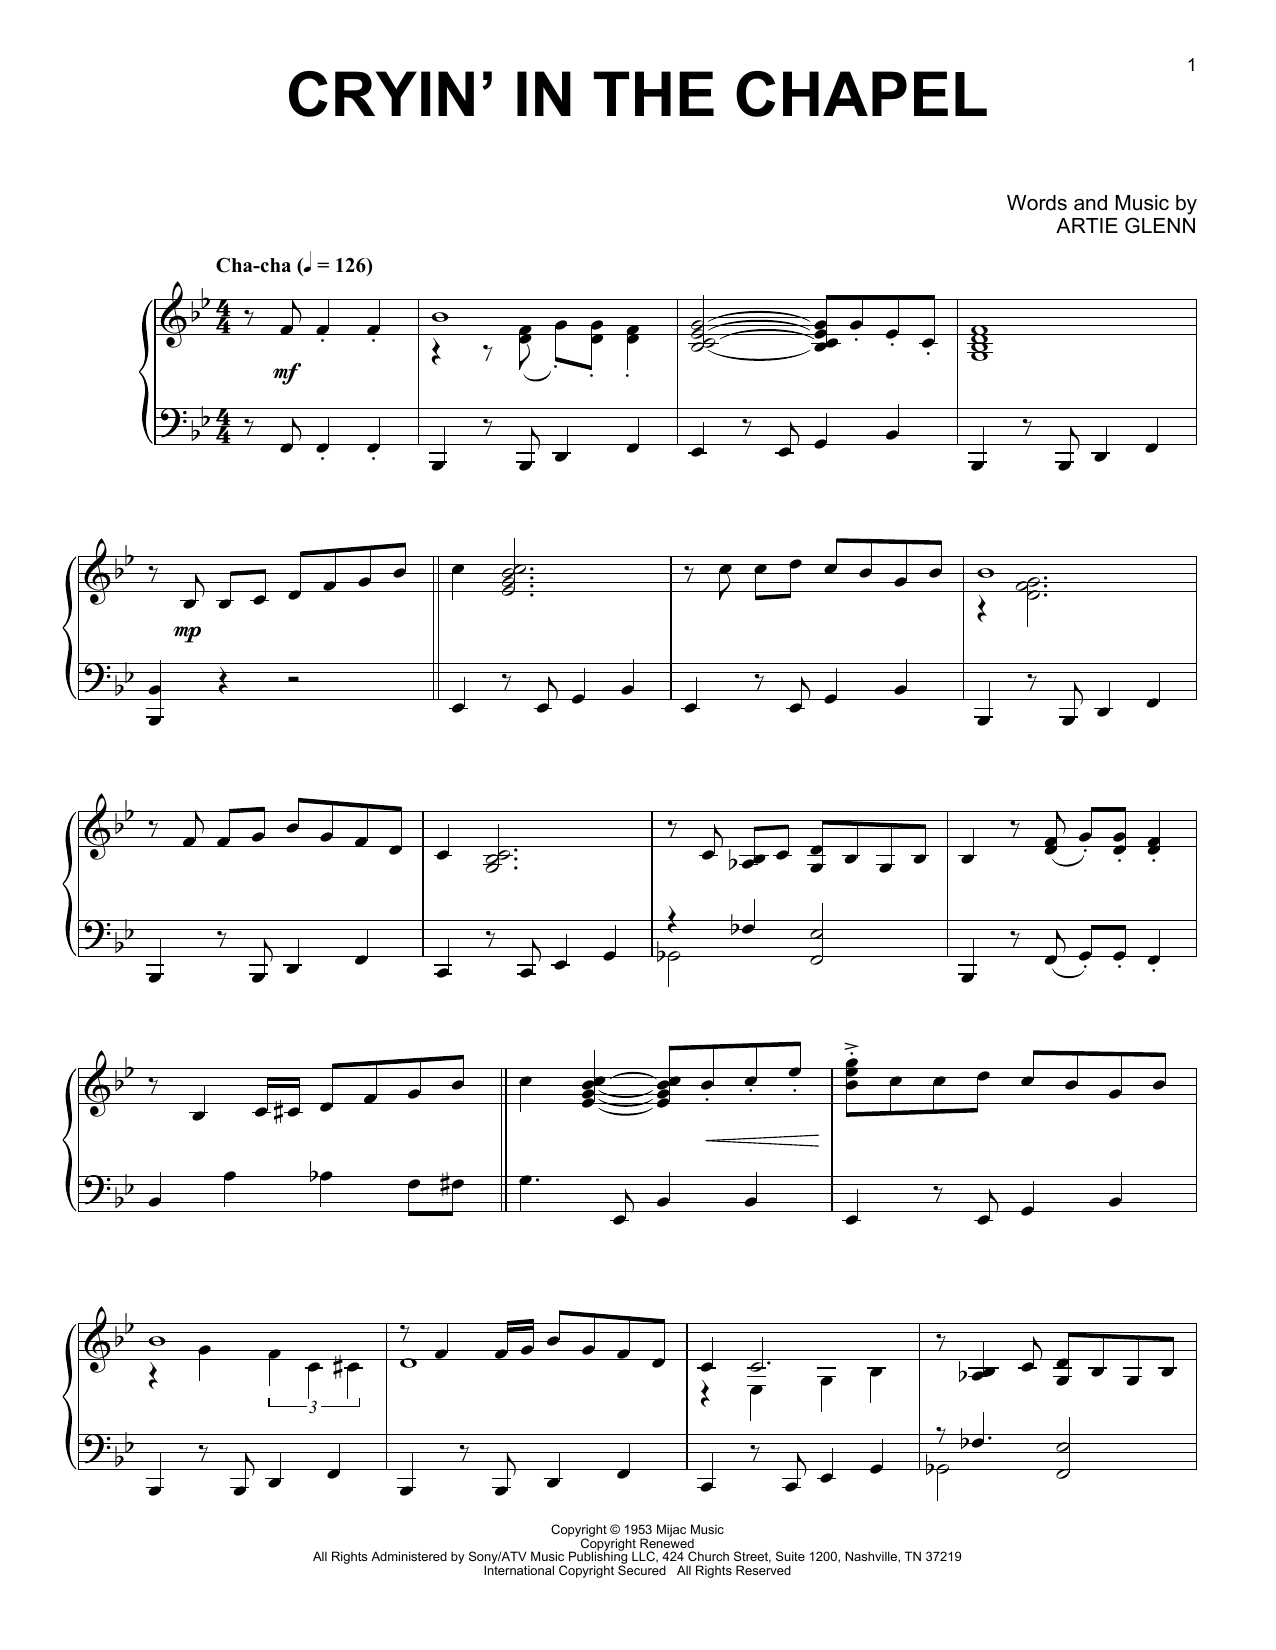 Download Elvis Presley Cryin' In The Chapel [Jazz version] Sheet Music